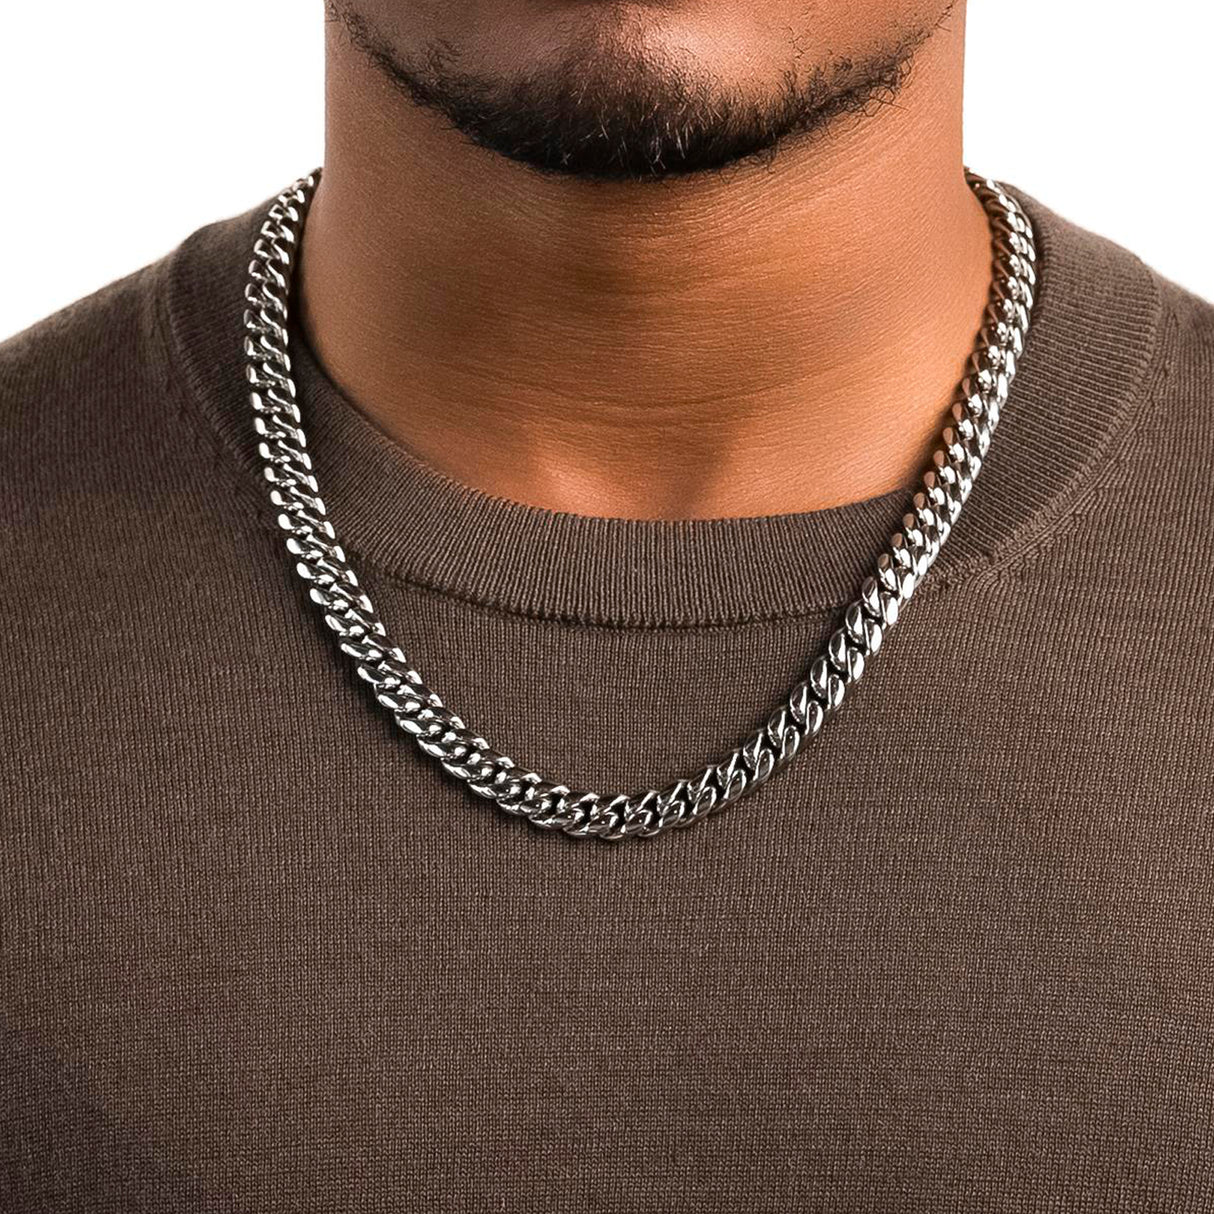 the-gold-gods-mens-jewelry-18k-white-gold-plated-miami-cuban-link-necklace-10mm-22inch